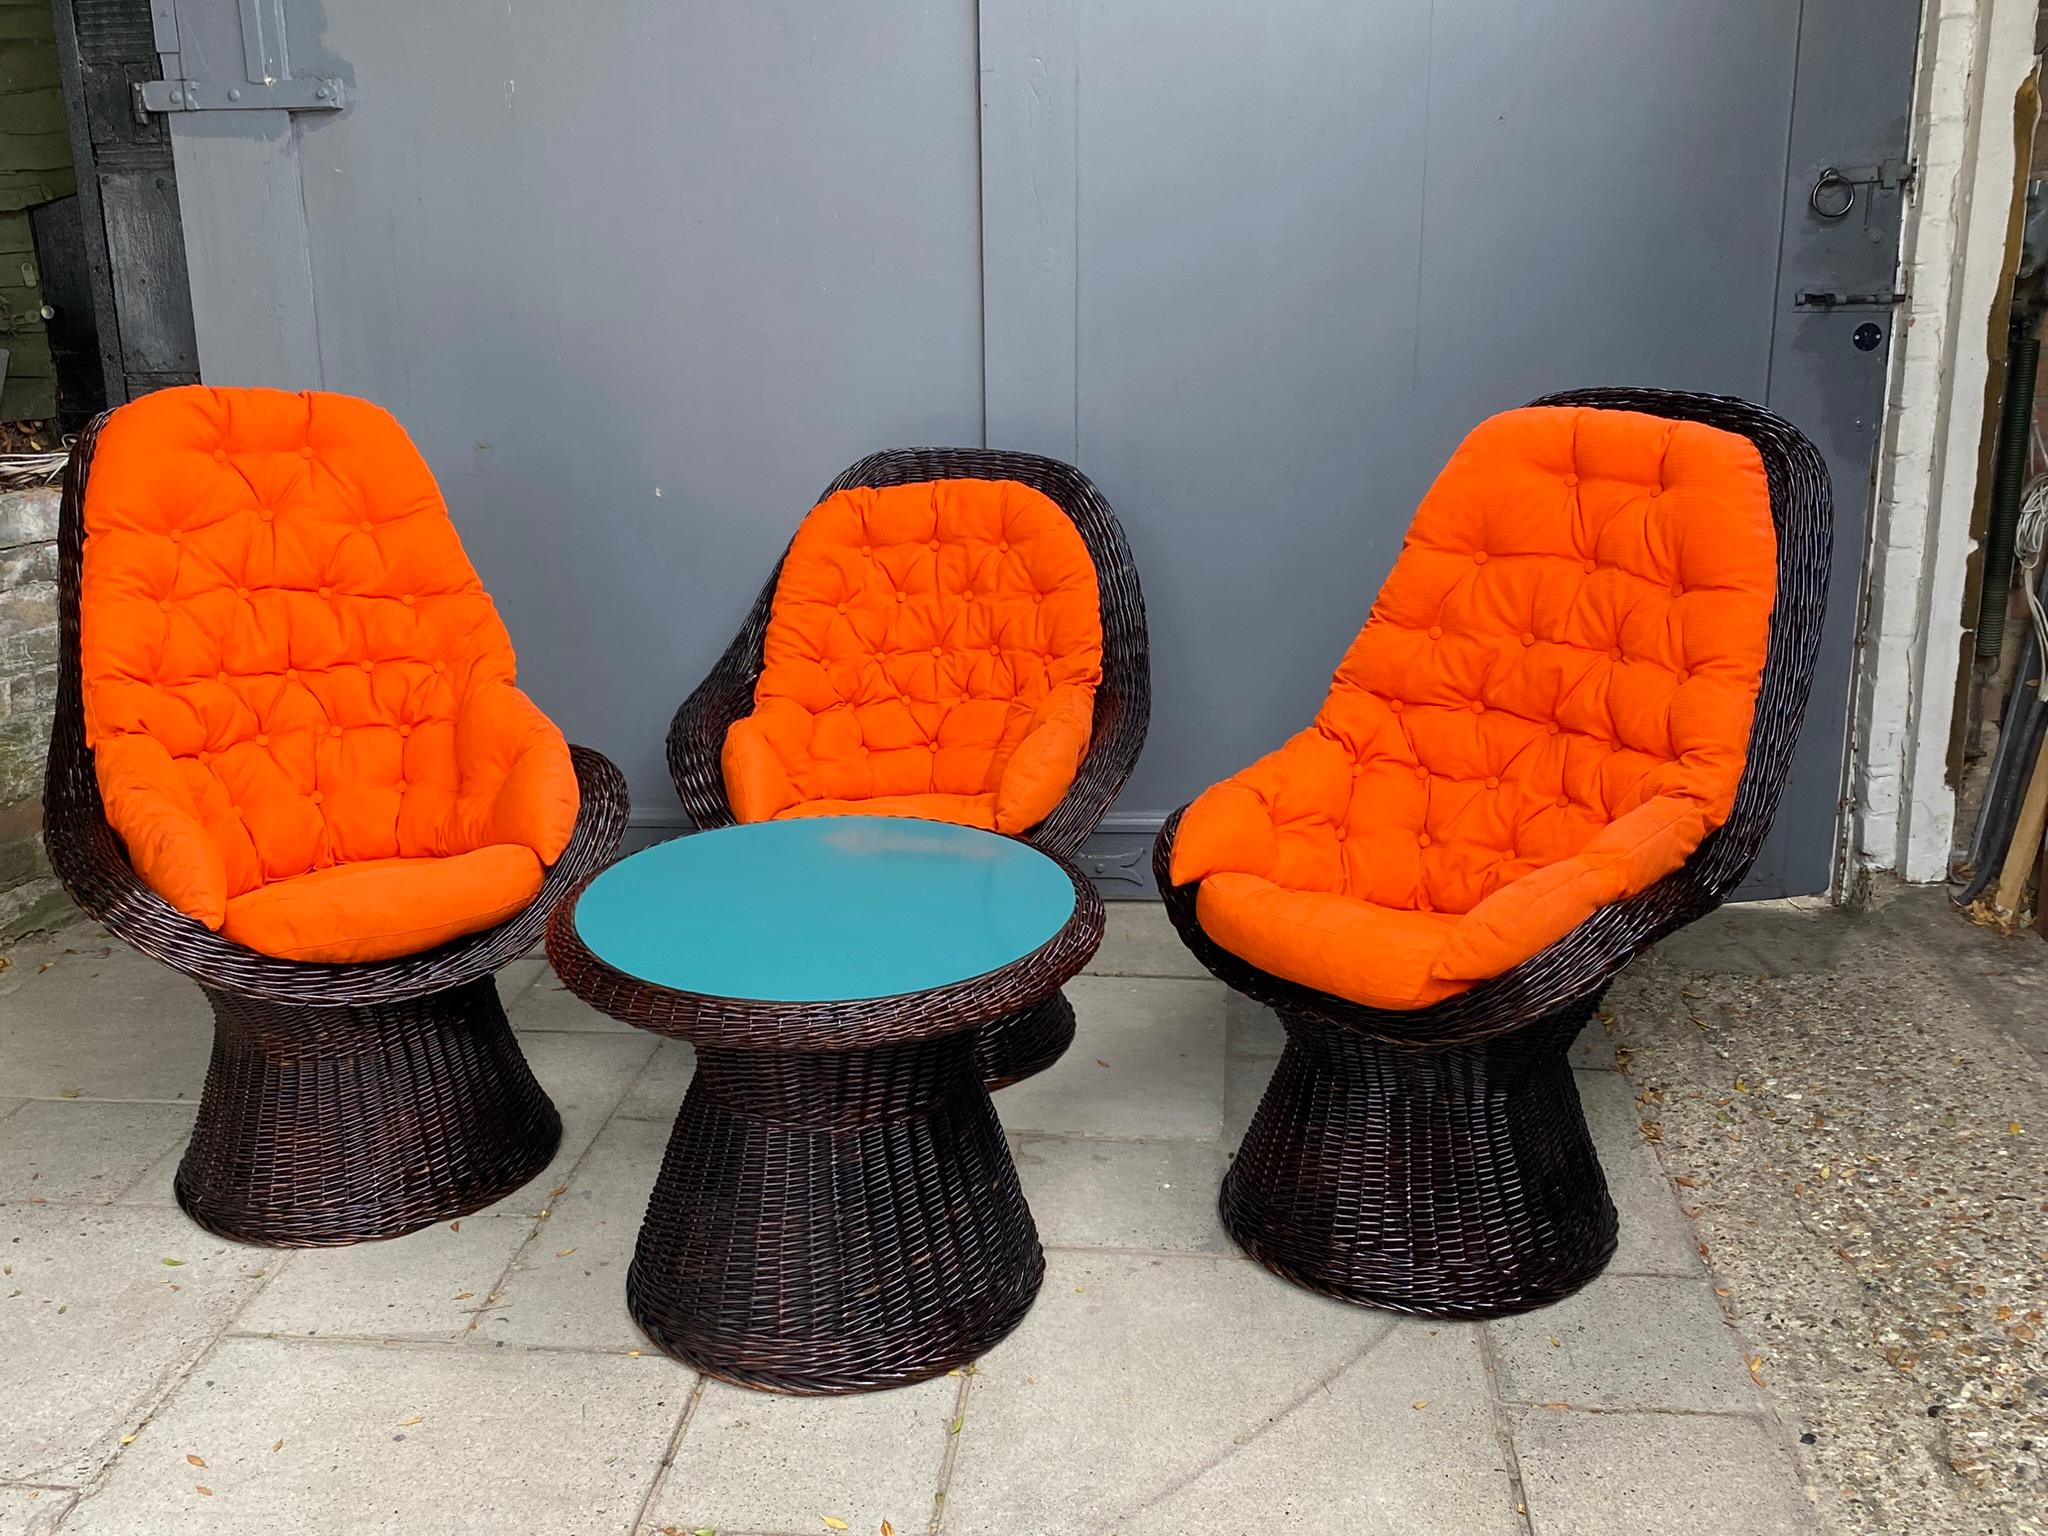 Set of Mid Century Rattan Chairs & Table By Rohe Noordwolde, Holland, 1970s

This mid-century Rattan chairs and table crafted by Rohe Noordwolde in Holland during the 1970s exude an unmistakable charm and timeless elegance. Renowned for their